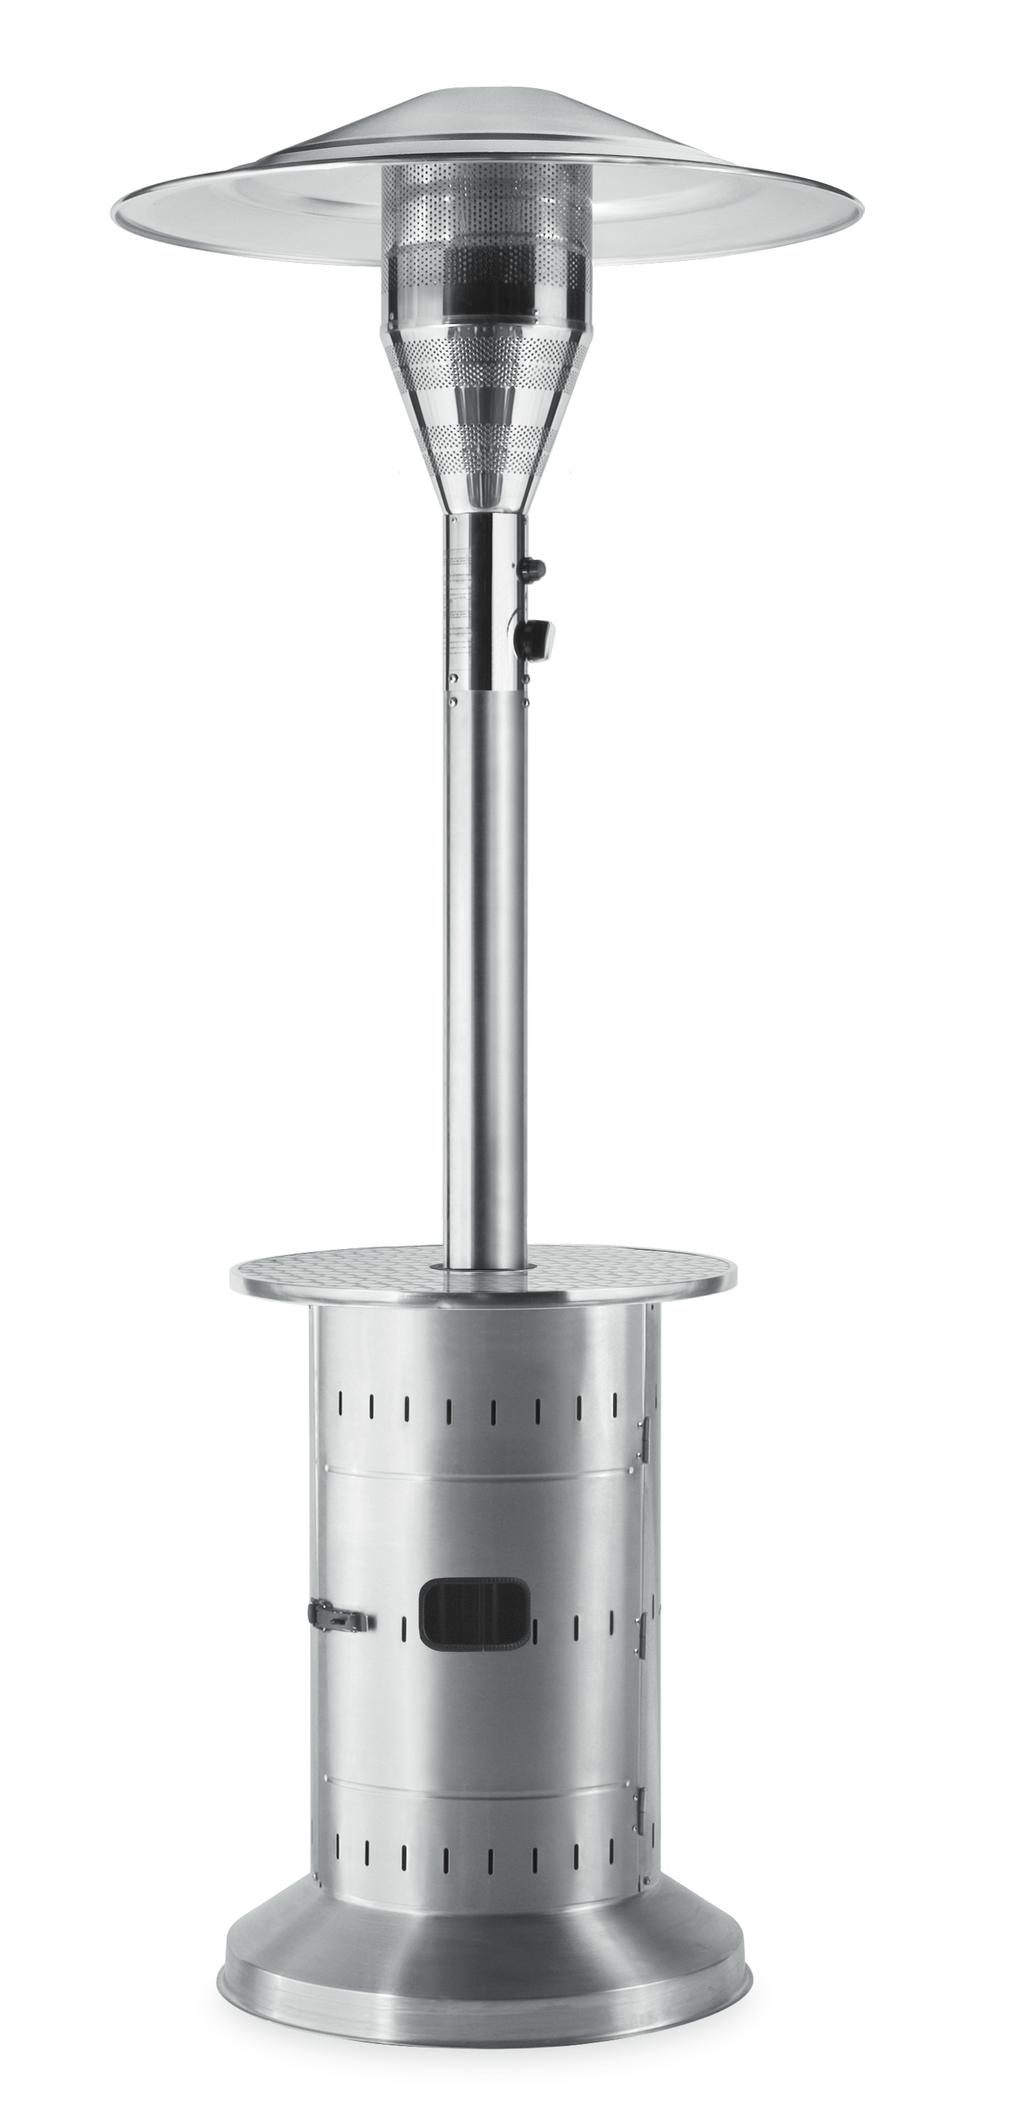 Commercial PATIO HEATER FIRESENSE 48,000 BTU COMMERCIAL PATIO HEATER WARNING! For Outdoor Use Only. WARNING! Improper installation, adjustment, alteration, service or maintenance can cause property damage, injury or death.